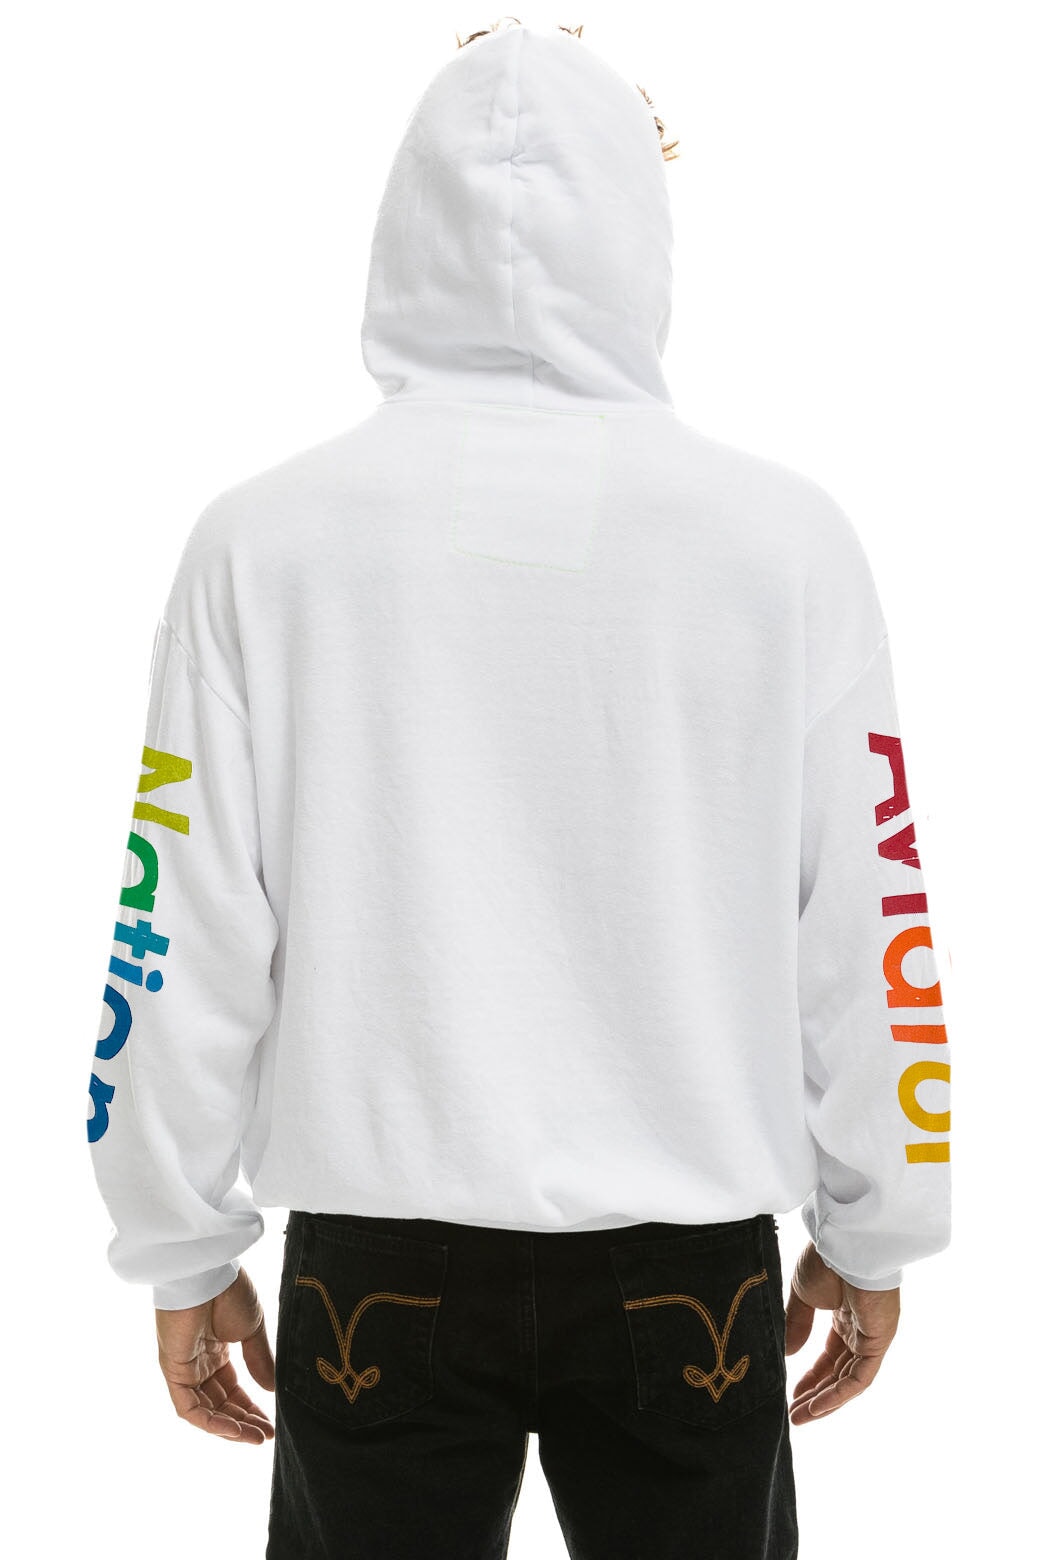 AVIATOR NATION MILL VALLEY RELAXED PULLOVER HOODIE - WHITE Hoodie Aviator Nation 